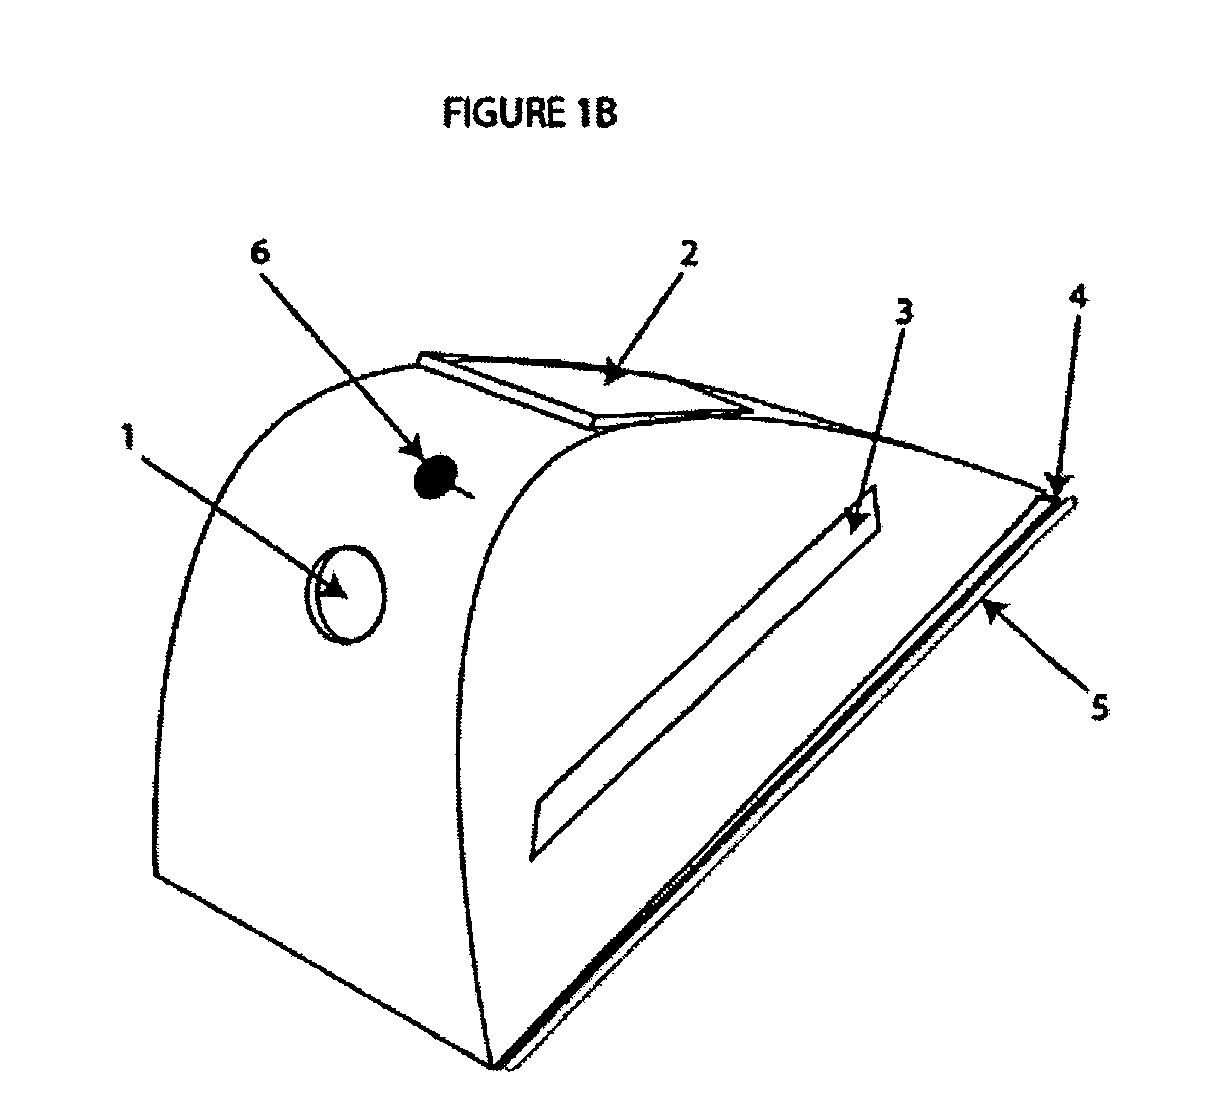 Method and apparatus for heating and applying warm antifog solution to endoscopes as well as a distal lens protector